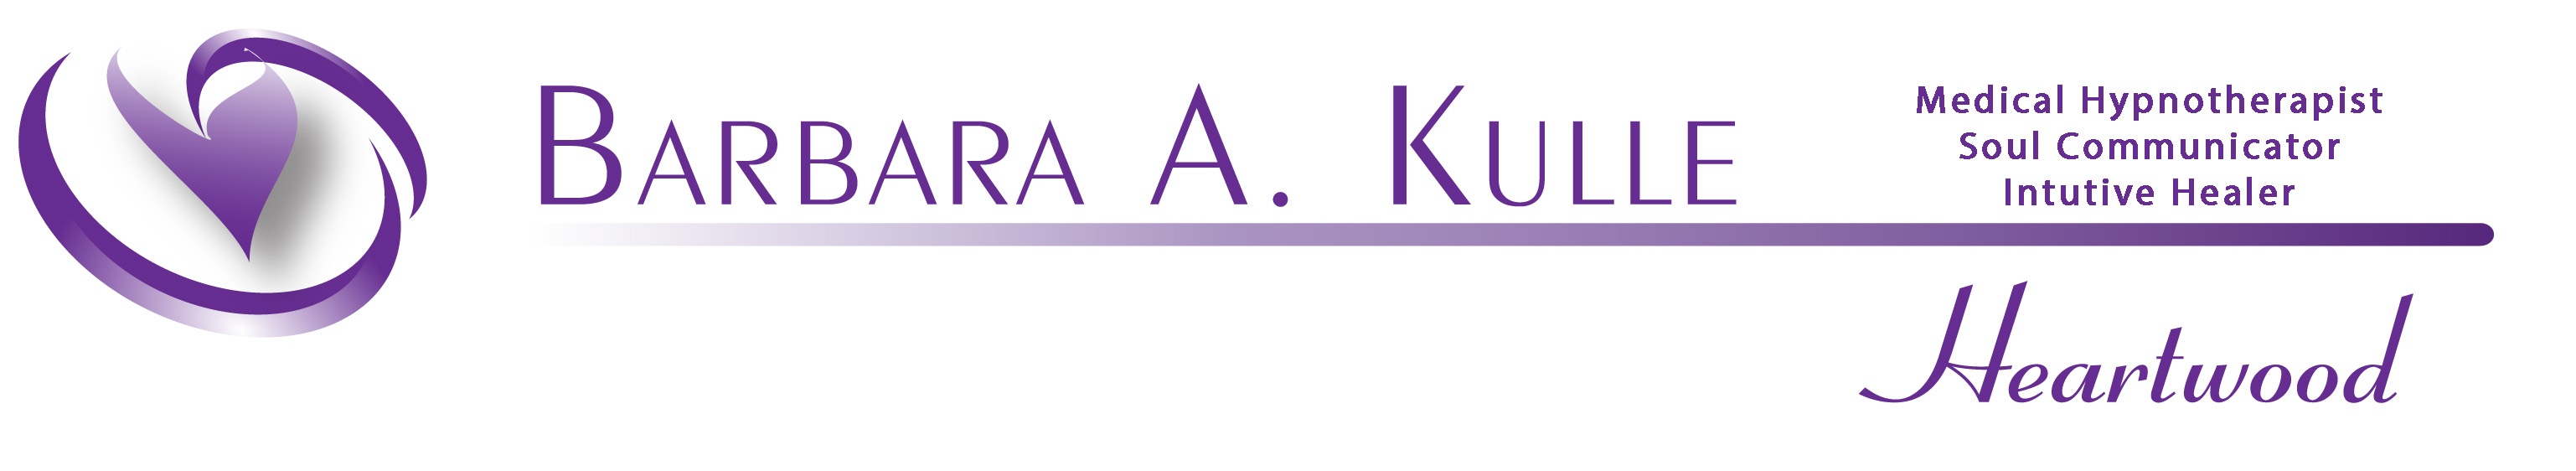 Barbara Kulle - Hypnotherapy | Healing Touch | Reiki | Relaxation Therapy -  Mountain View, Los Altos, Menlo Park, CA